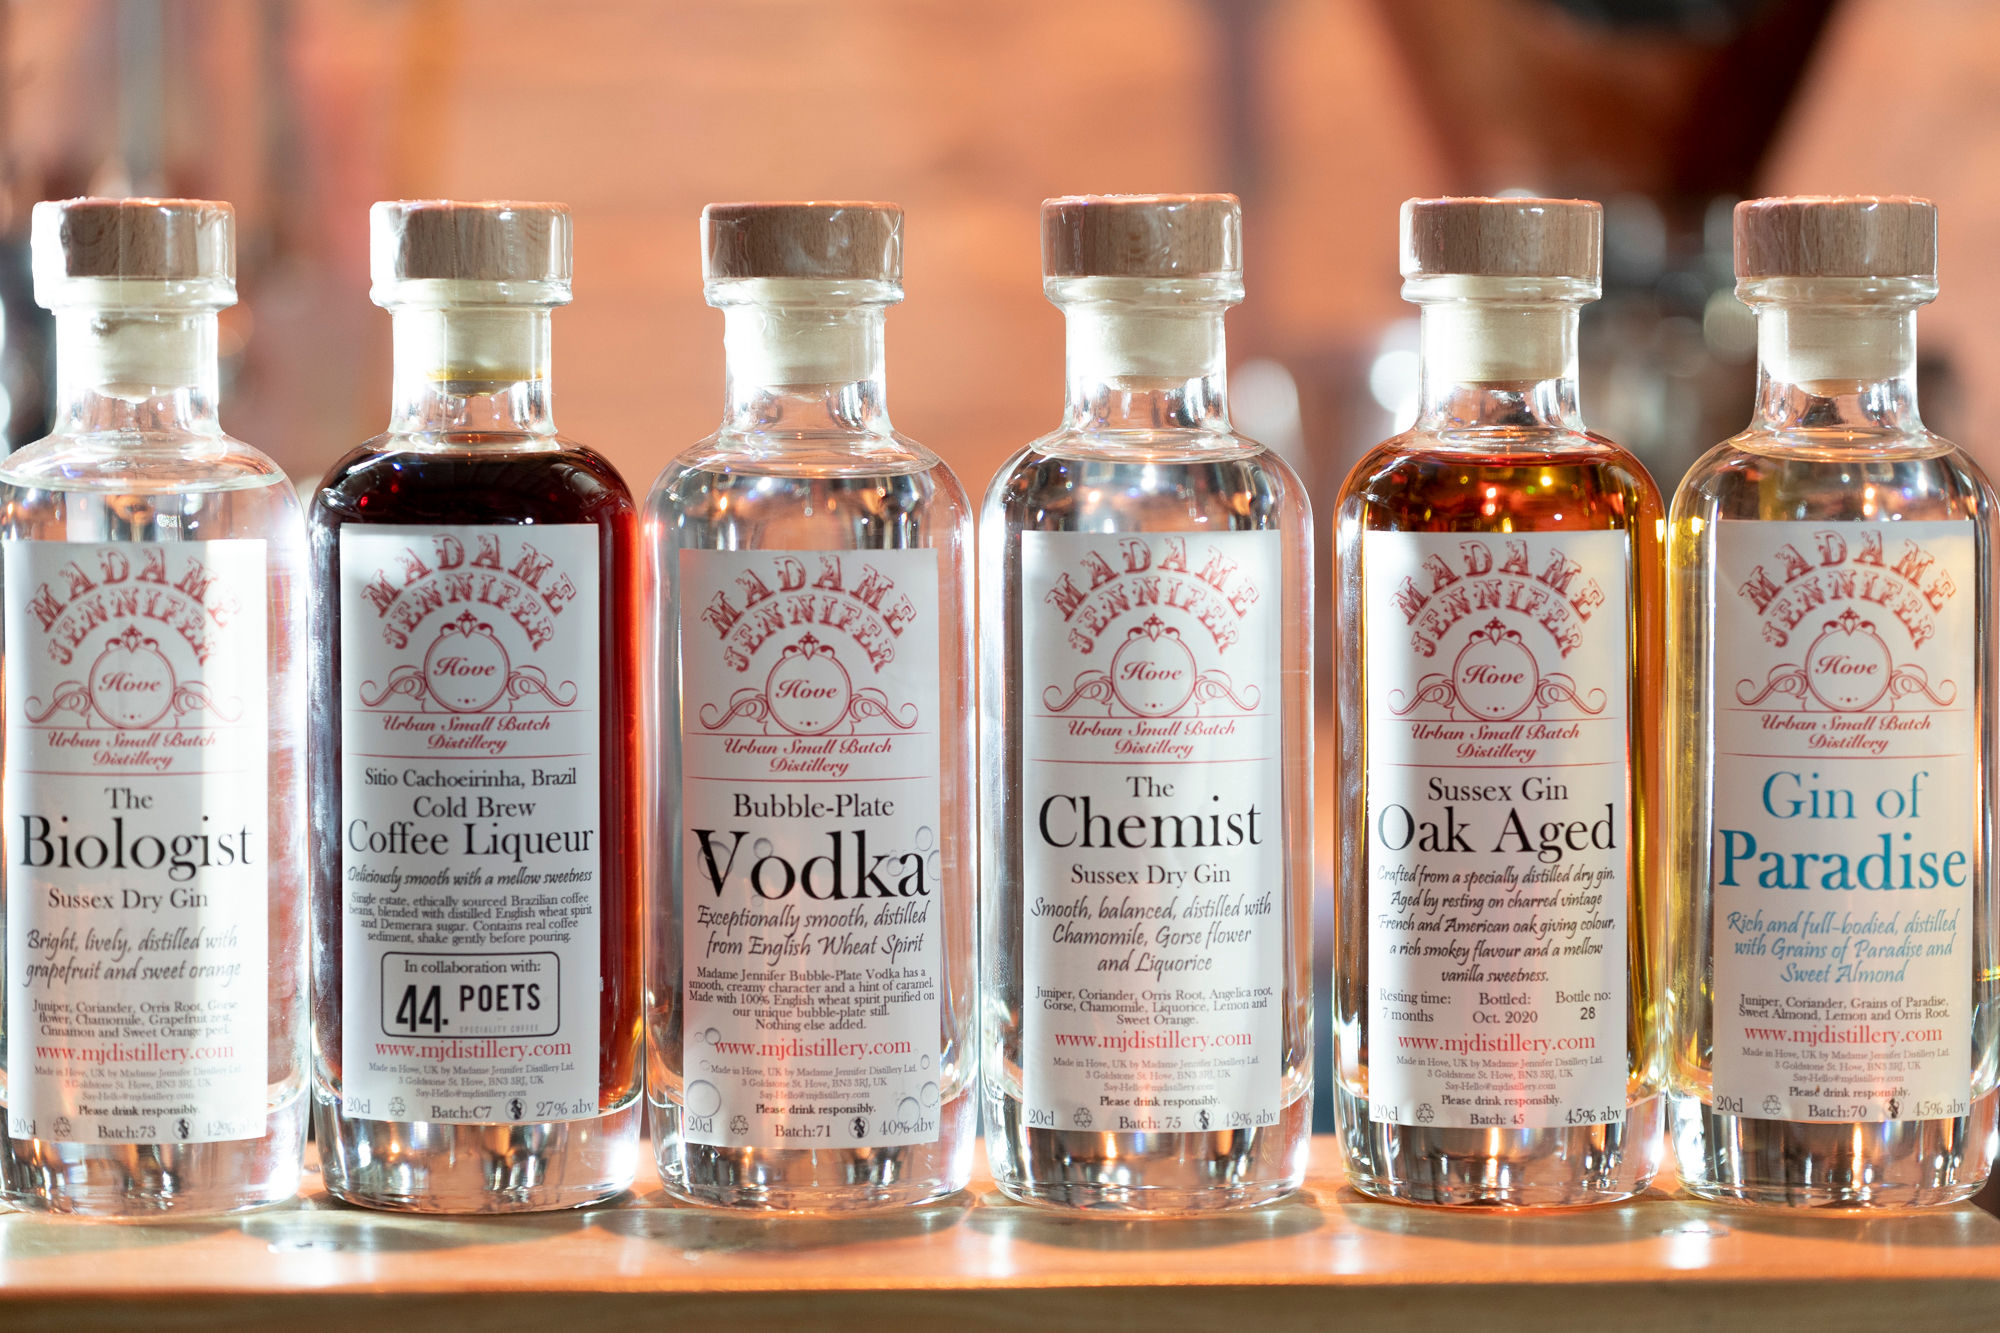 A lineup of six spirit bottles from Madame Jenifer's distillery in Hove